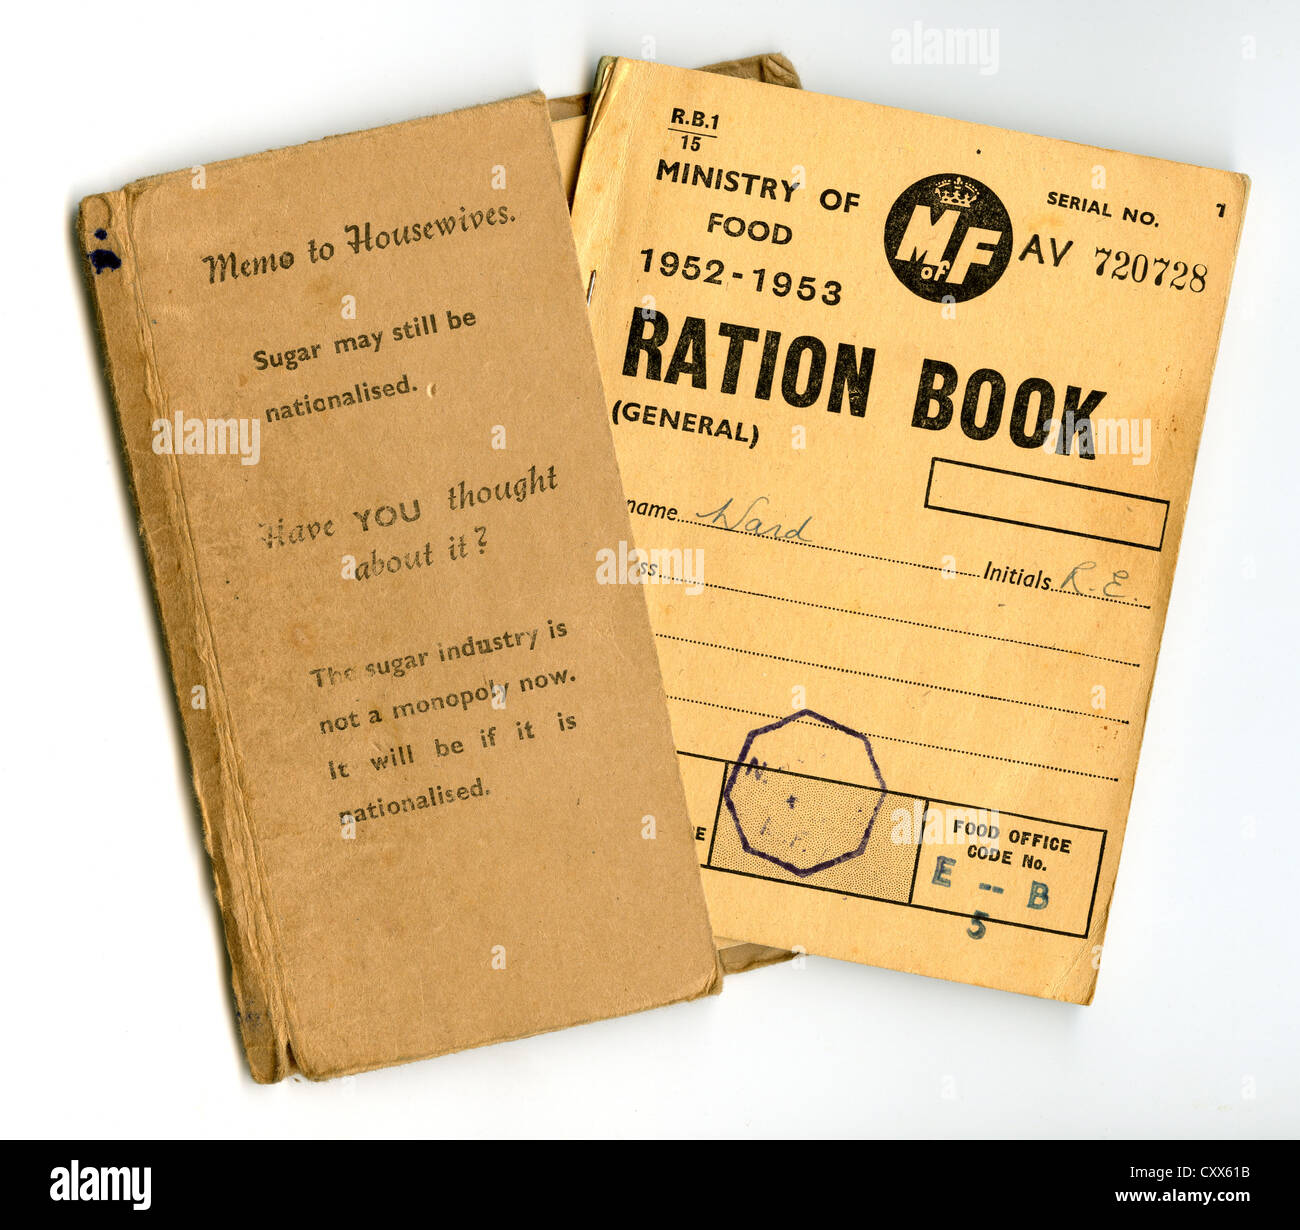 British Ration Book from the Ministry of Food, 1952-53, with 'Memo to Housewives' Stock Photo